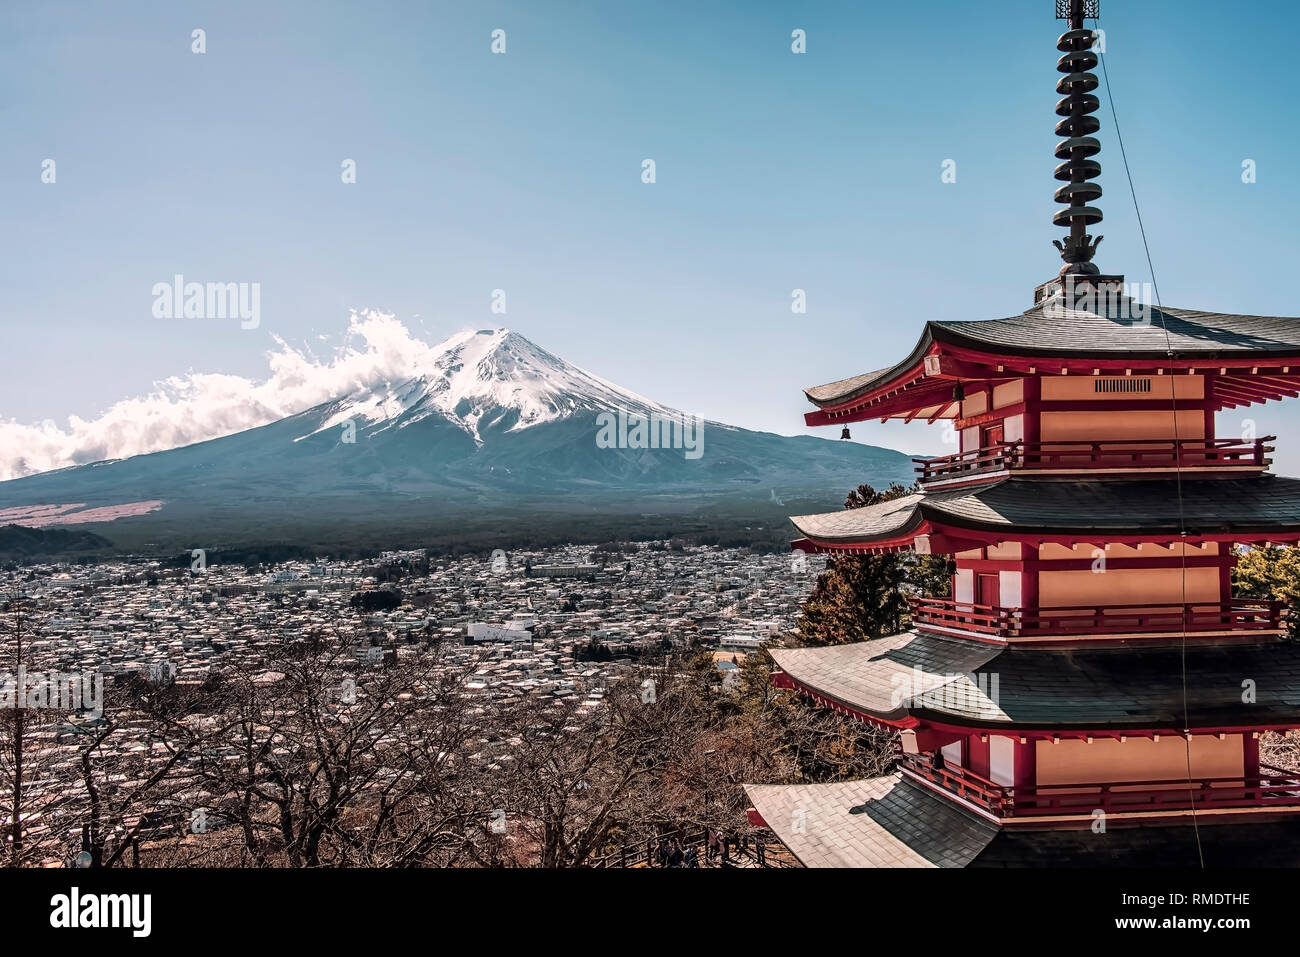 Famous Place of Japan with Chureito pagoda and Mount Fuji at sunset Stock Photo